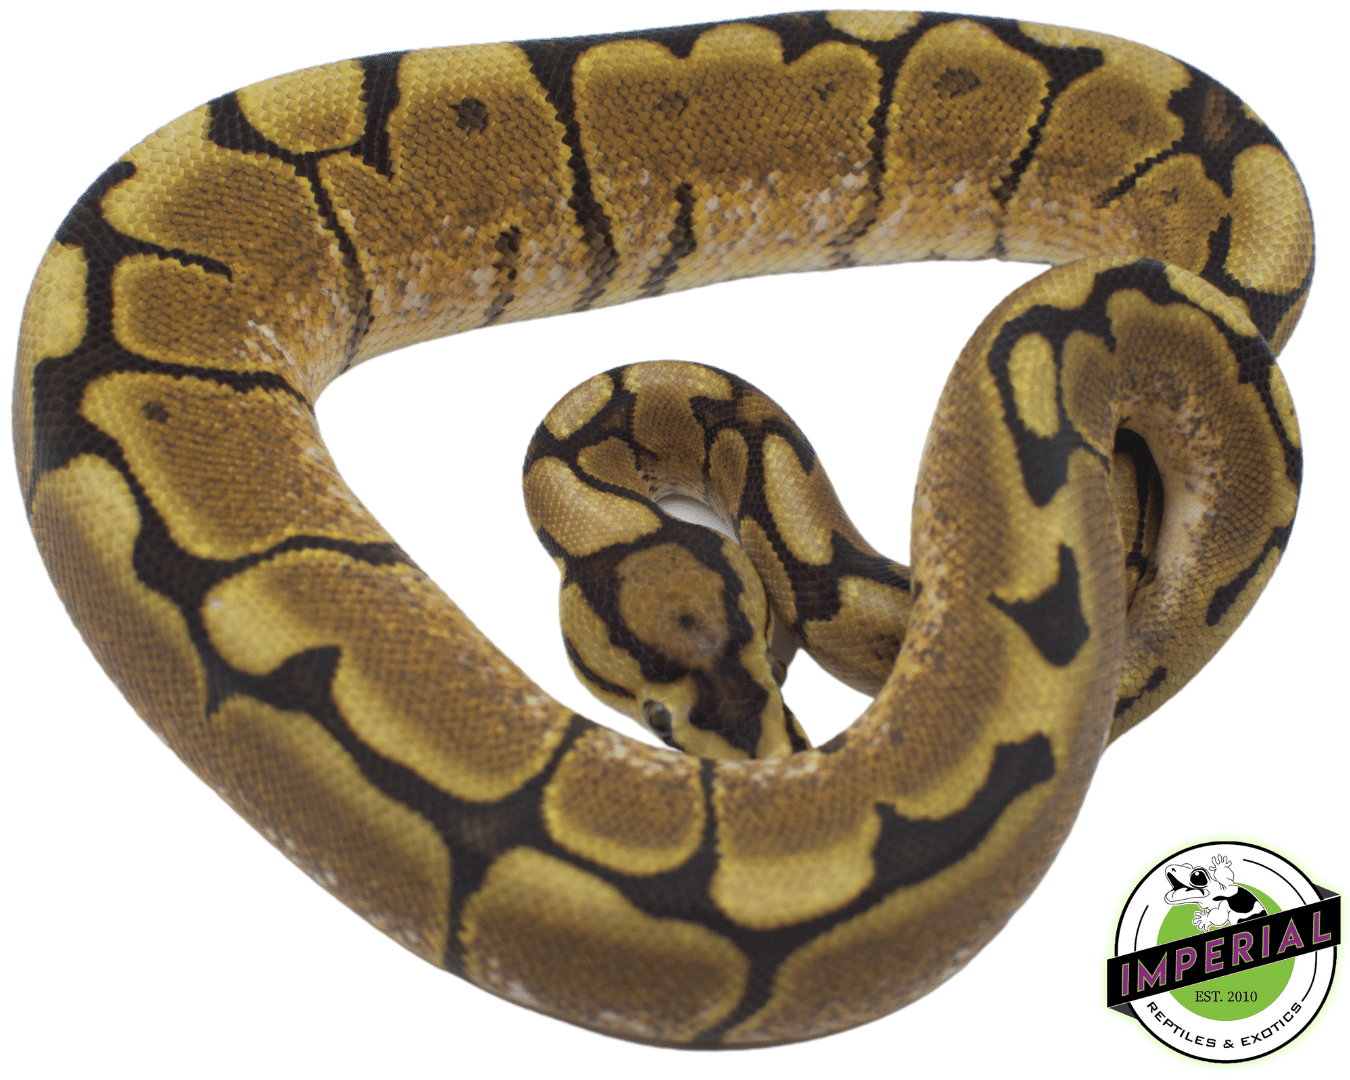 spider yellowbelly ball python for sale, buy reptiles online